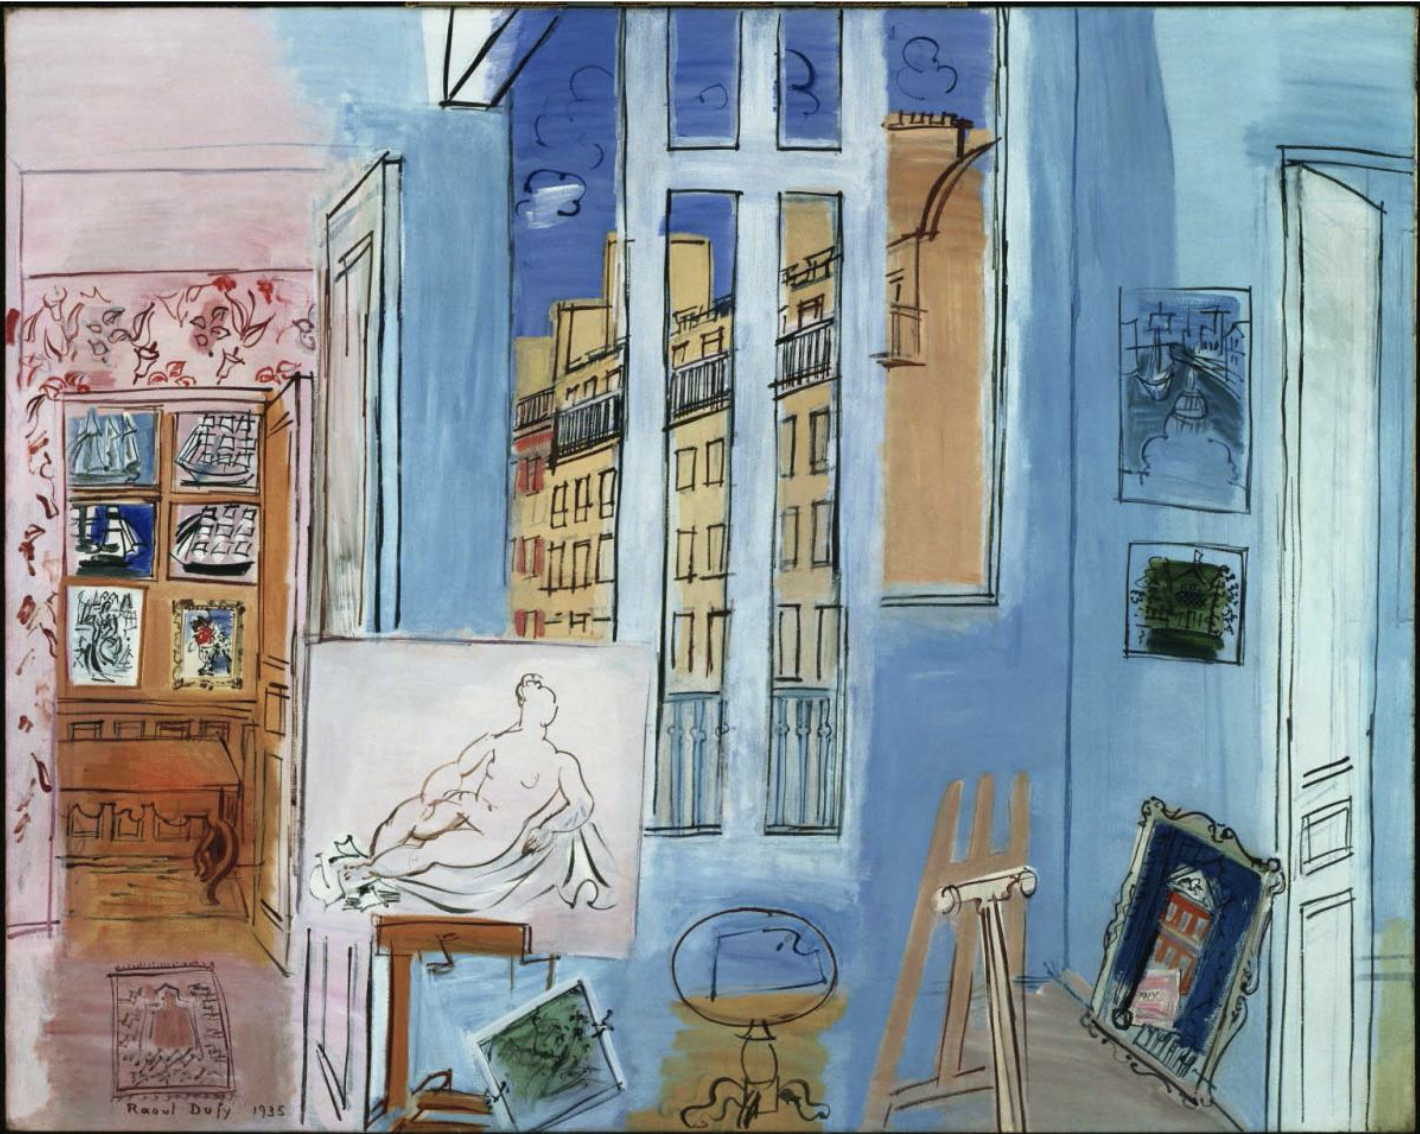 The Artist Study
by Raoul Dufy